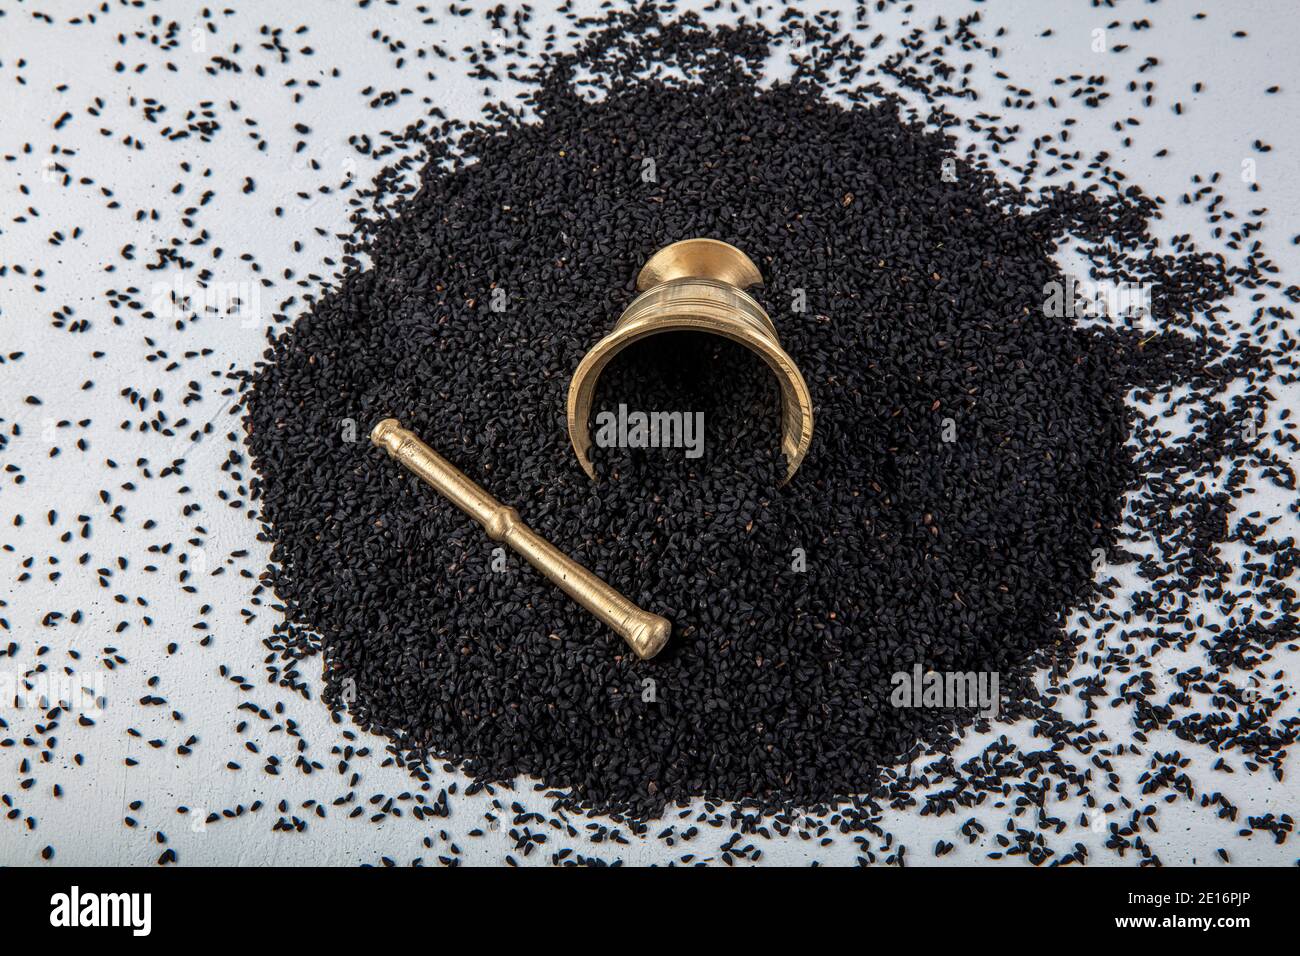 Nigella sativa seeds also known as black cumin, kalo jeera, kalonji and black caraway in iron scoop and mortar on white wooden background with copy sp Stock Photo